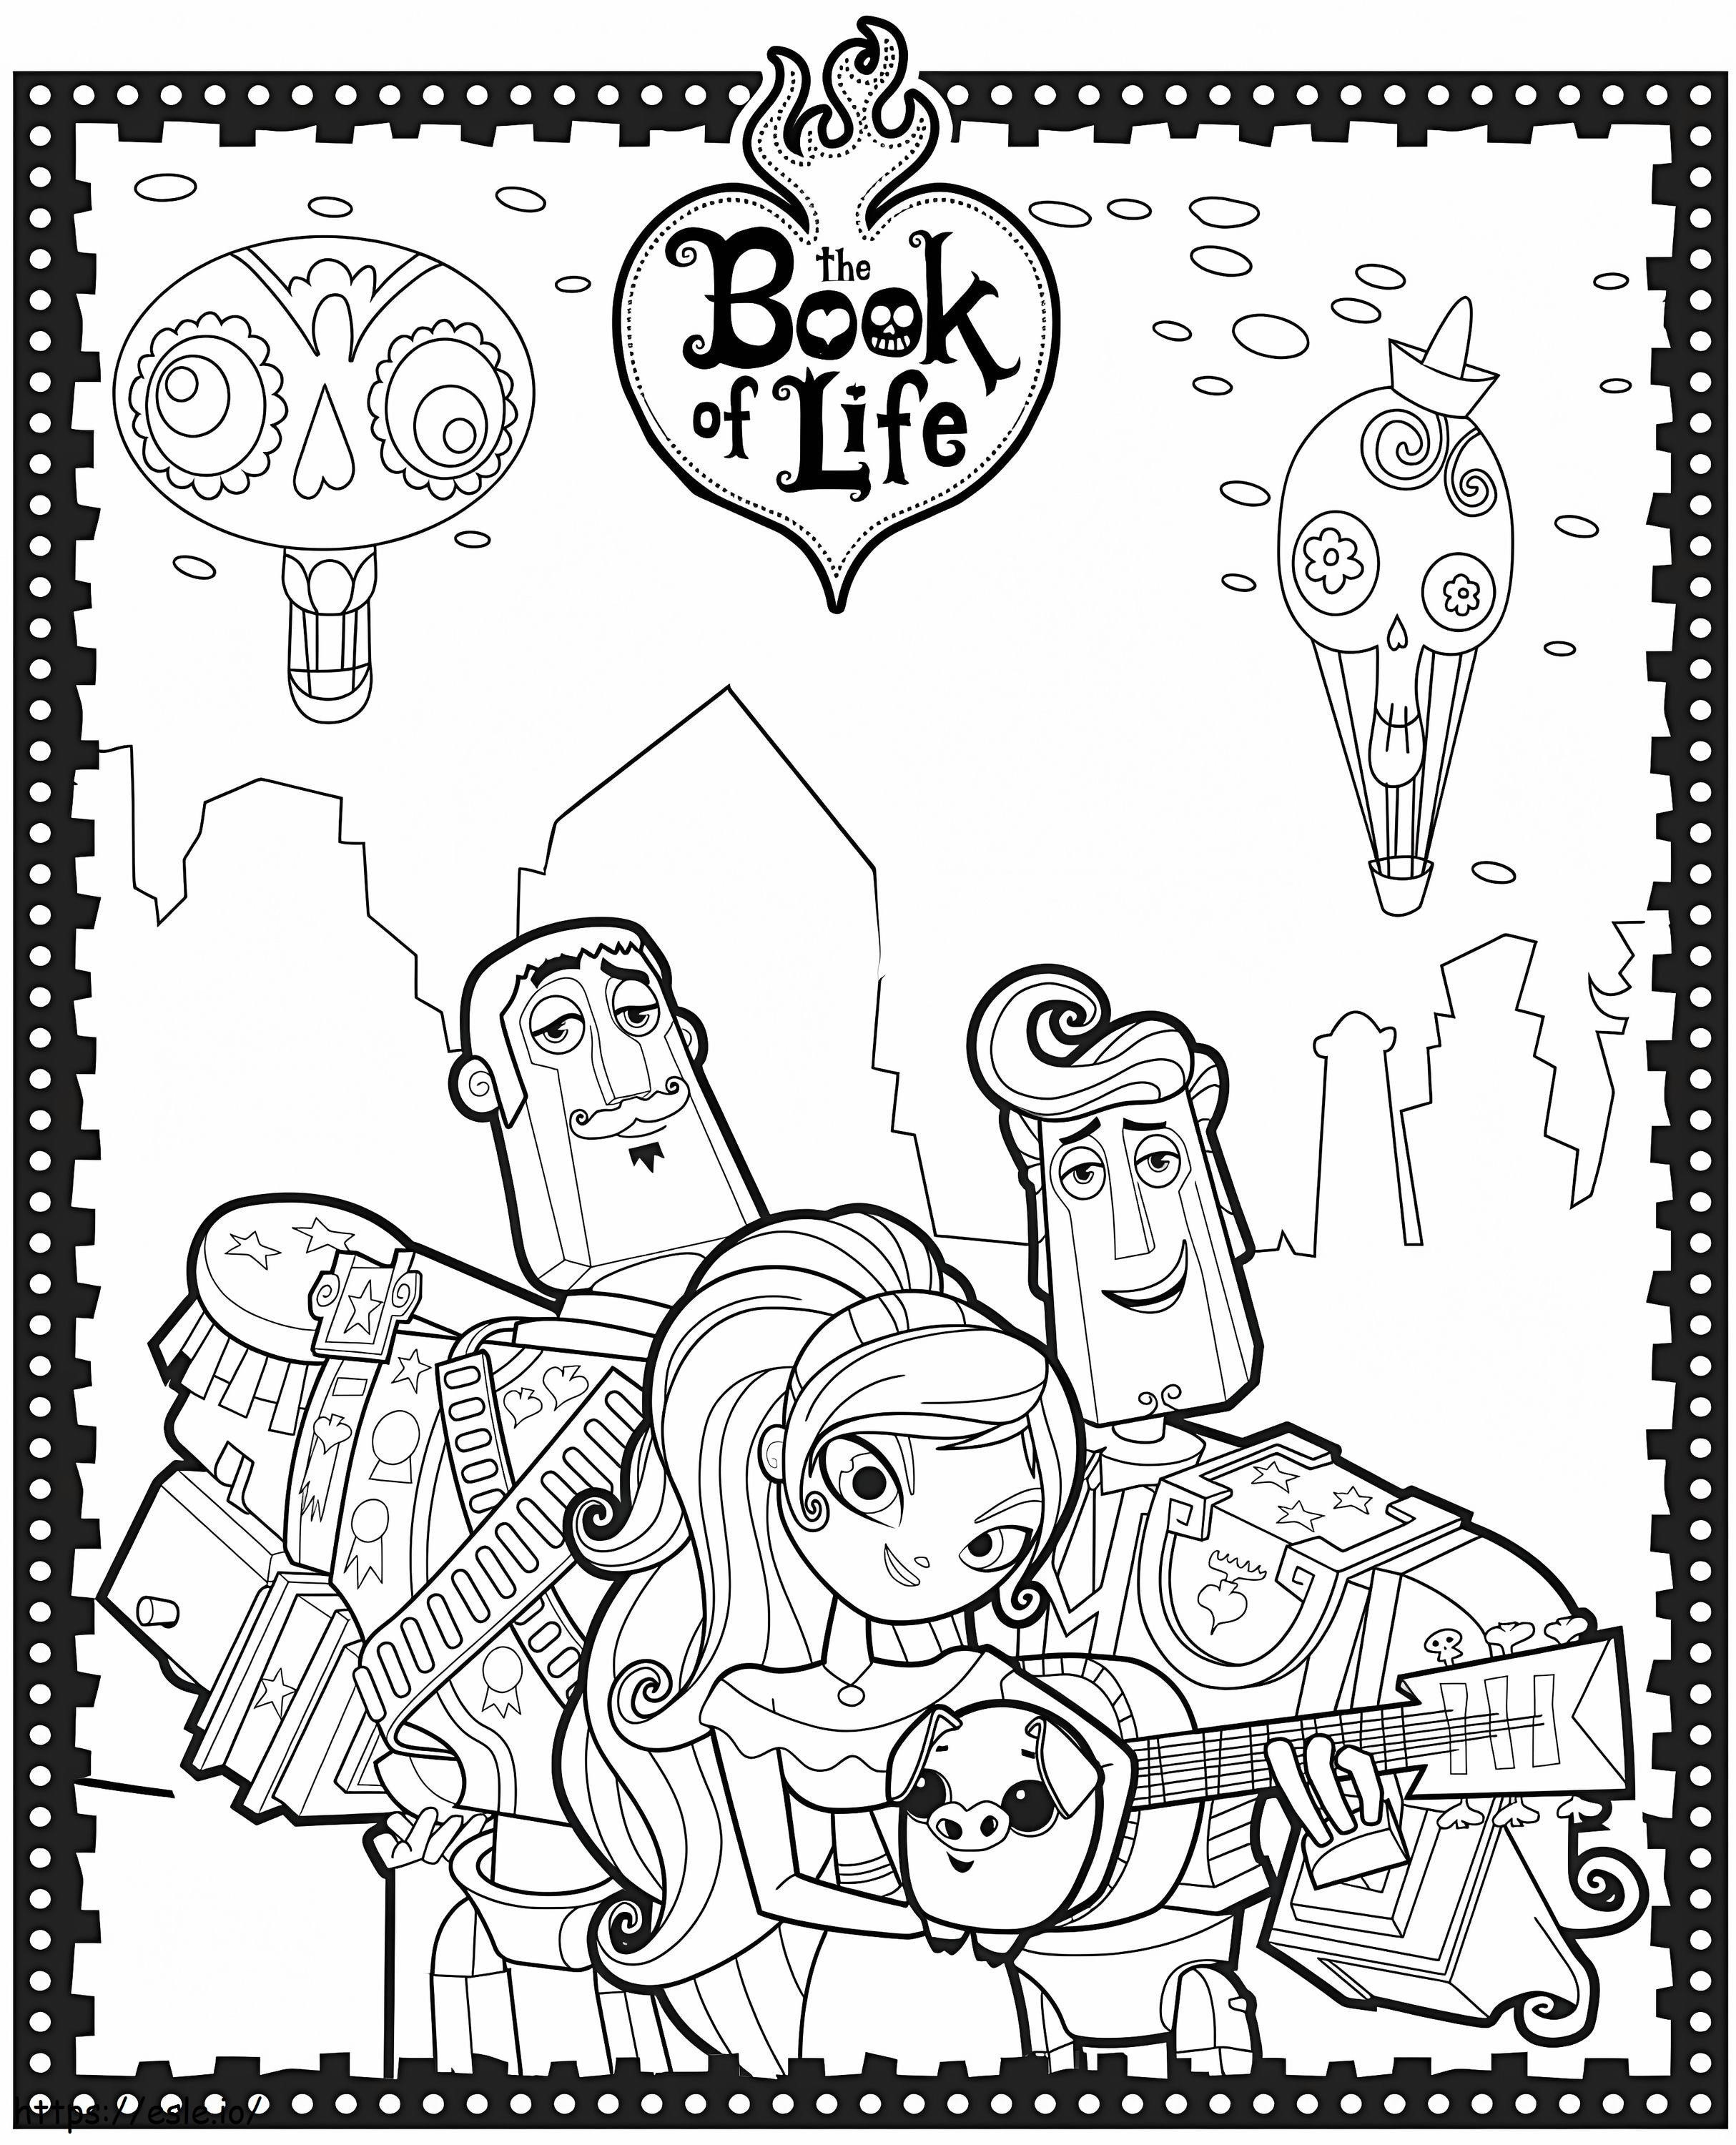 The Book Of Life Characters coloring page